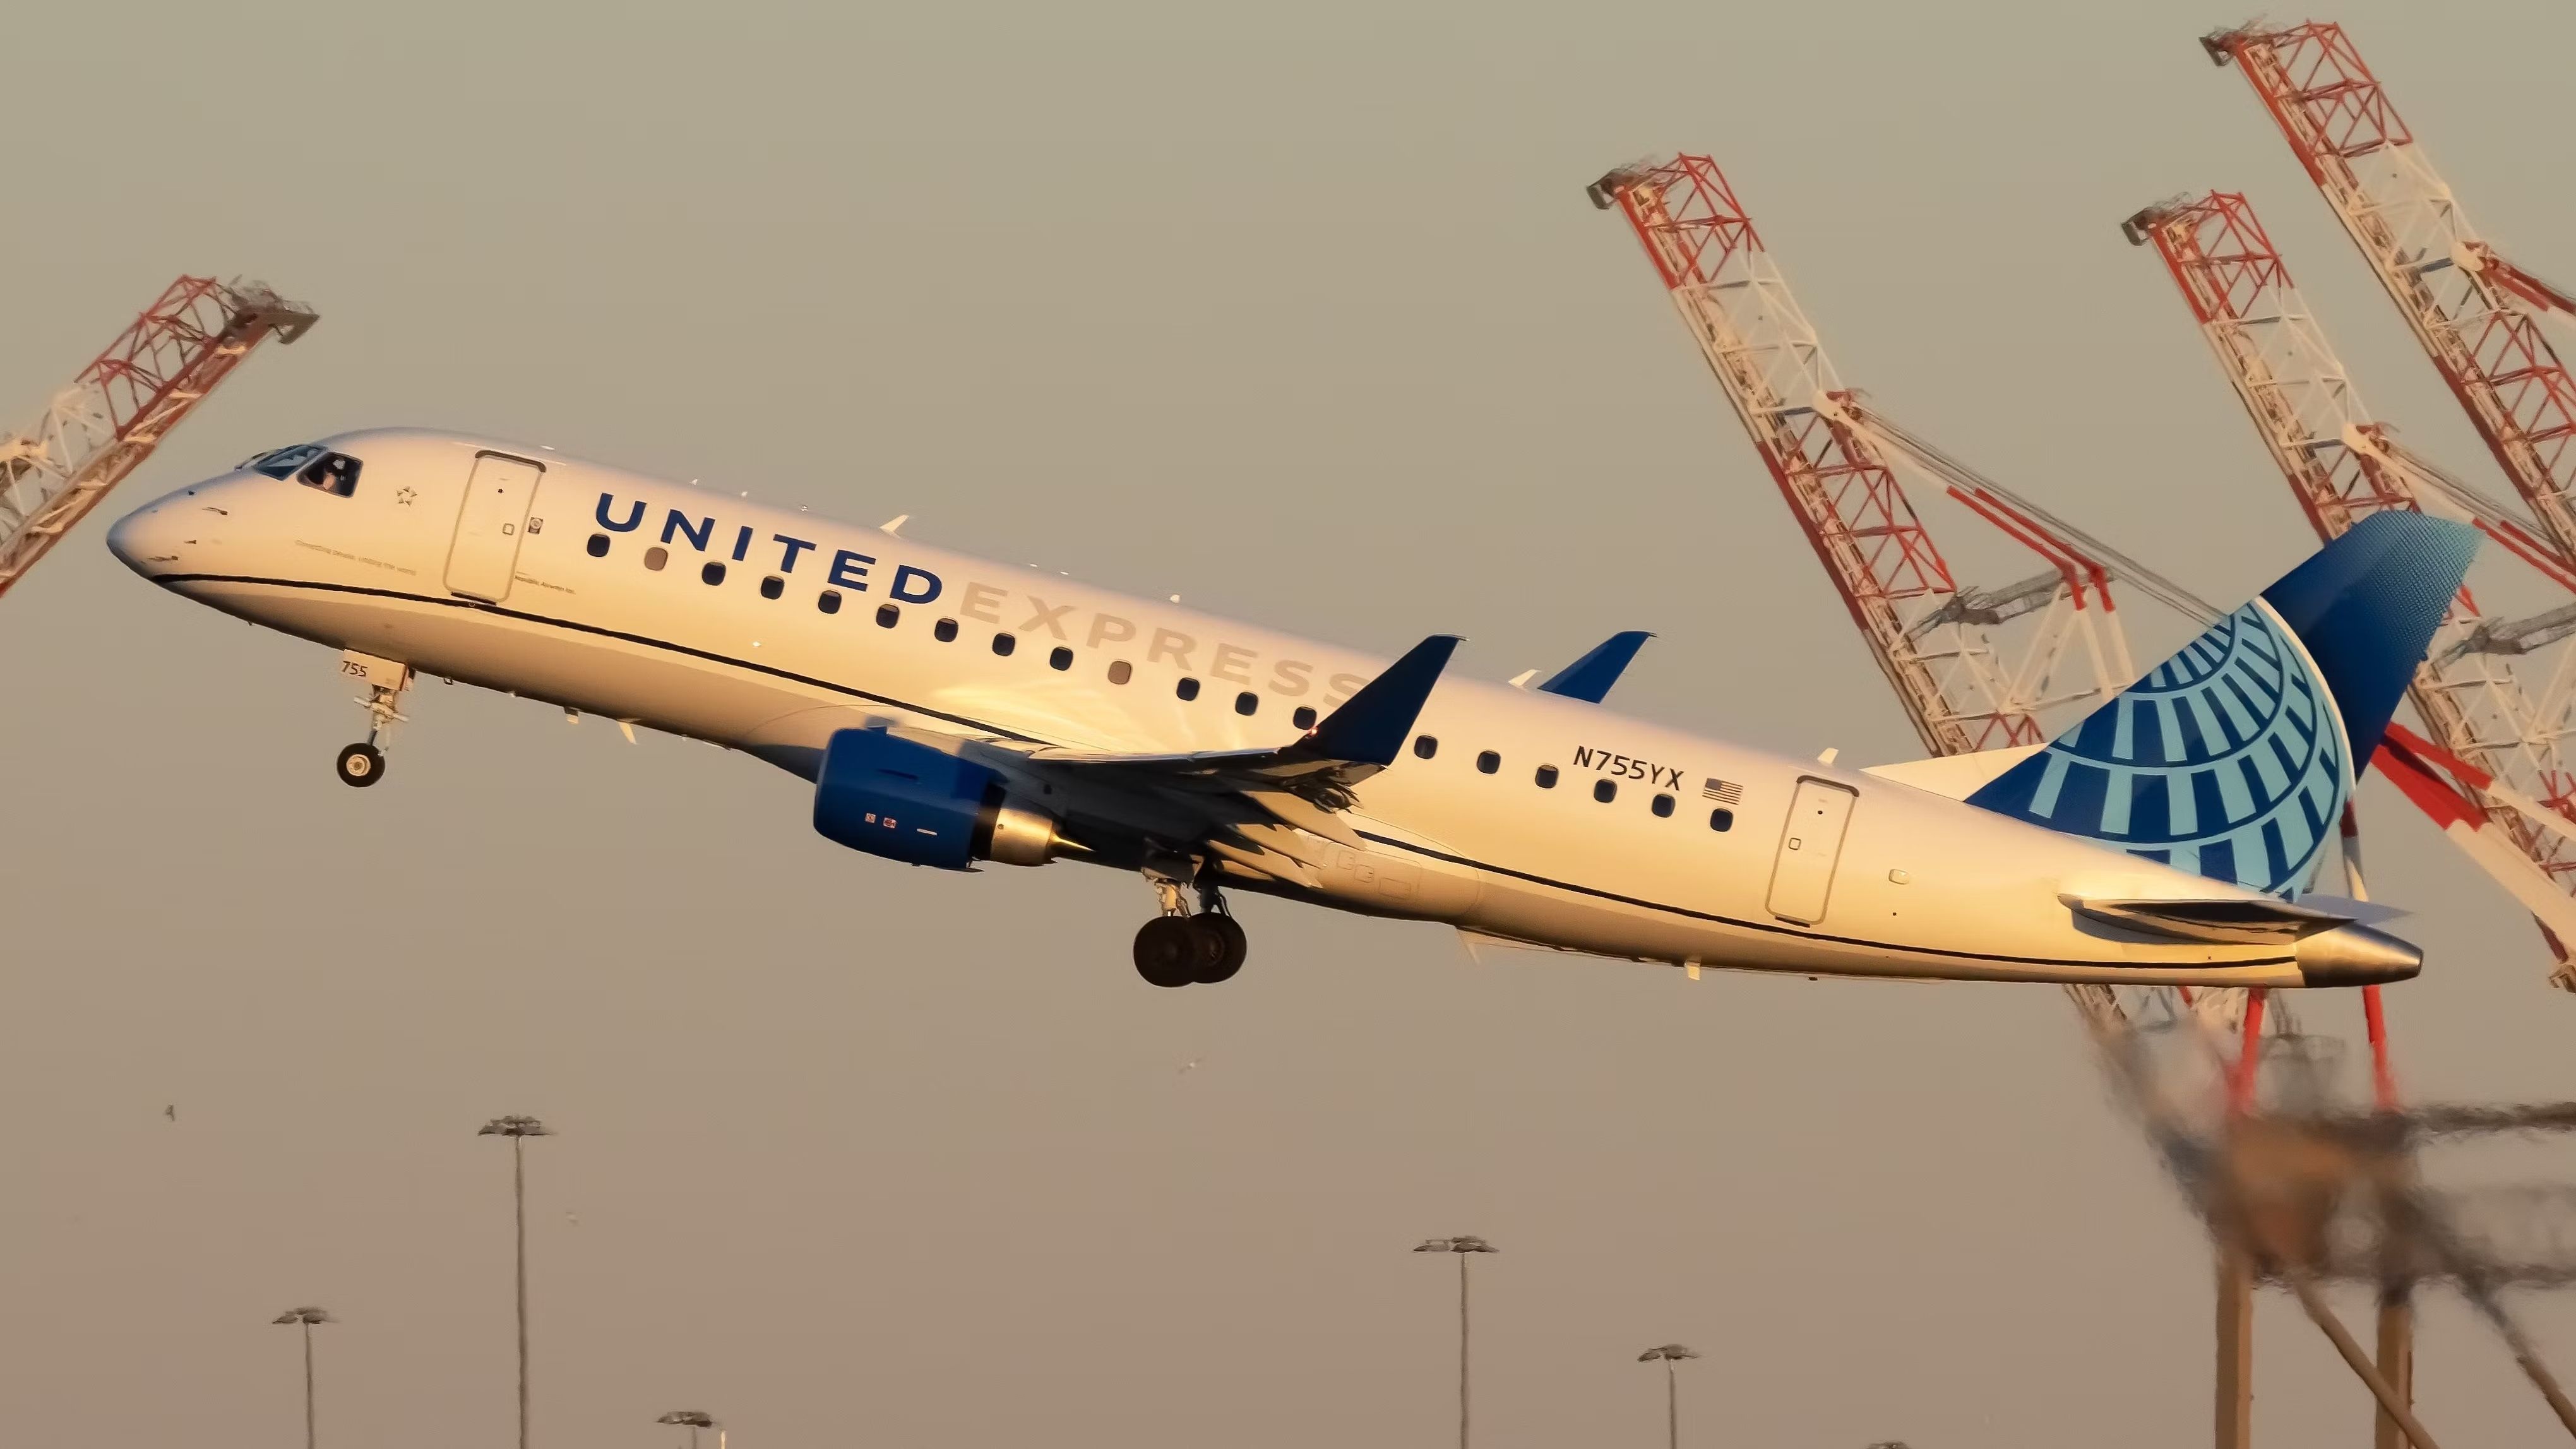 A Look At The History Of The Embraer 175 At United Airlines